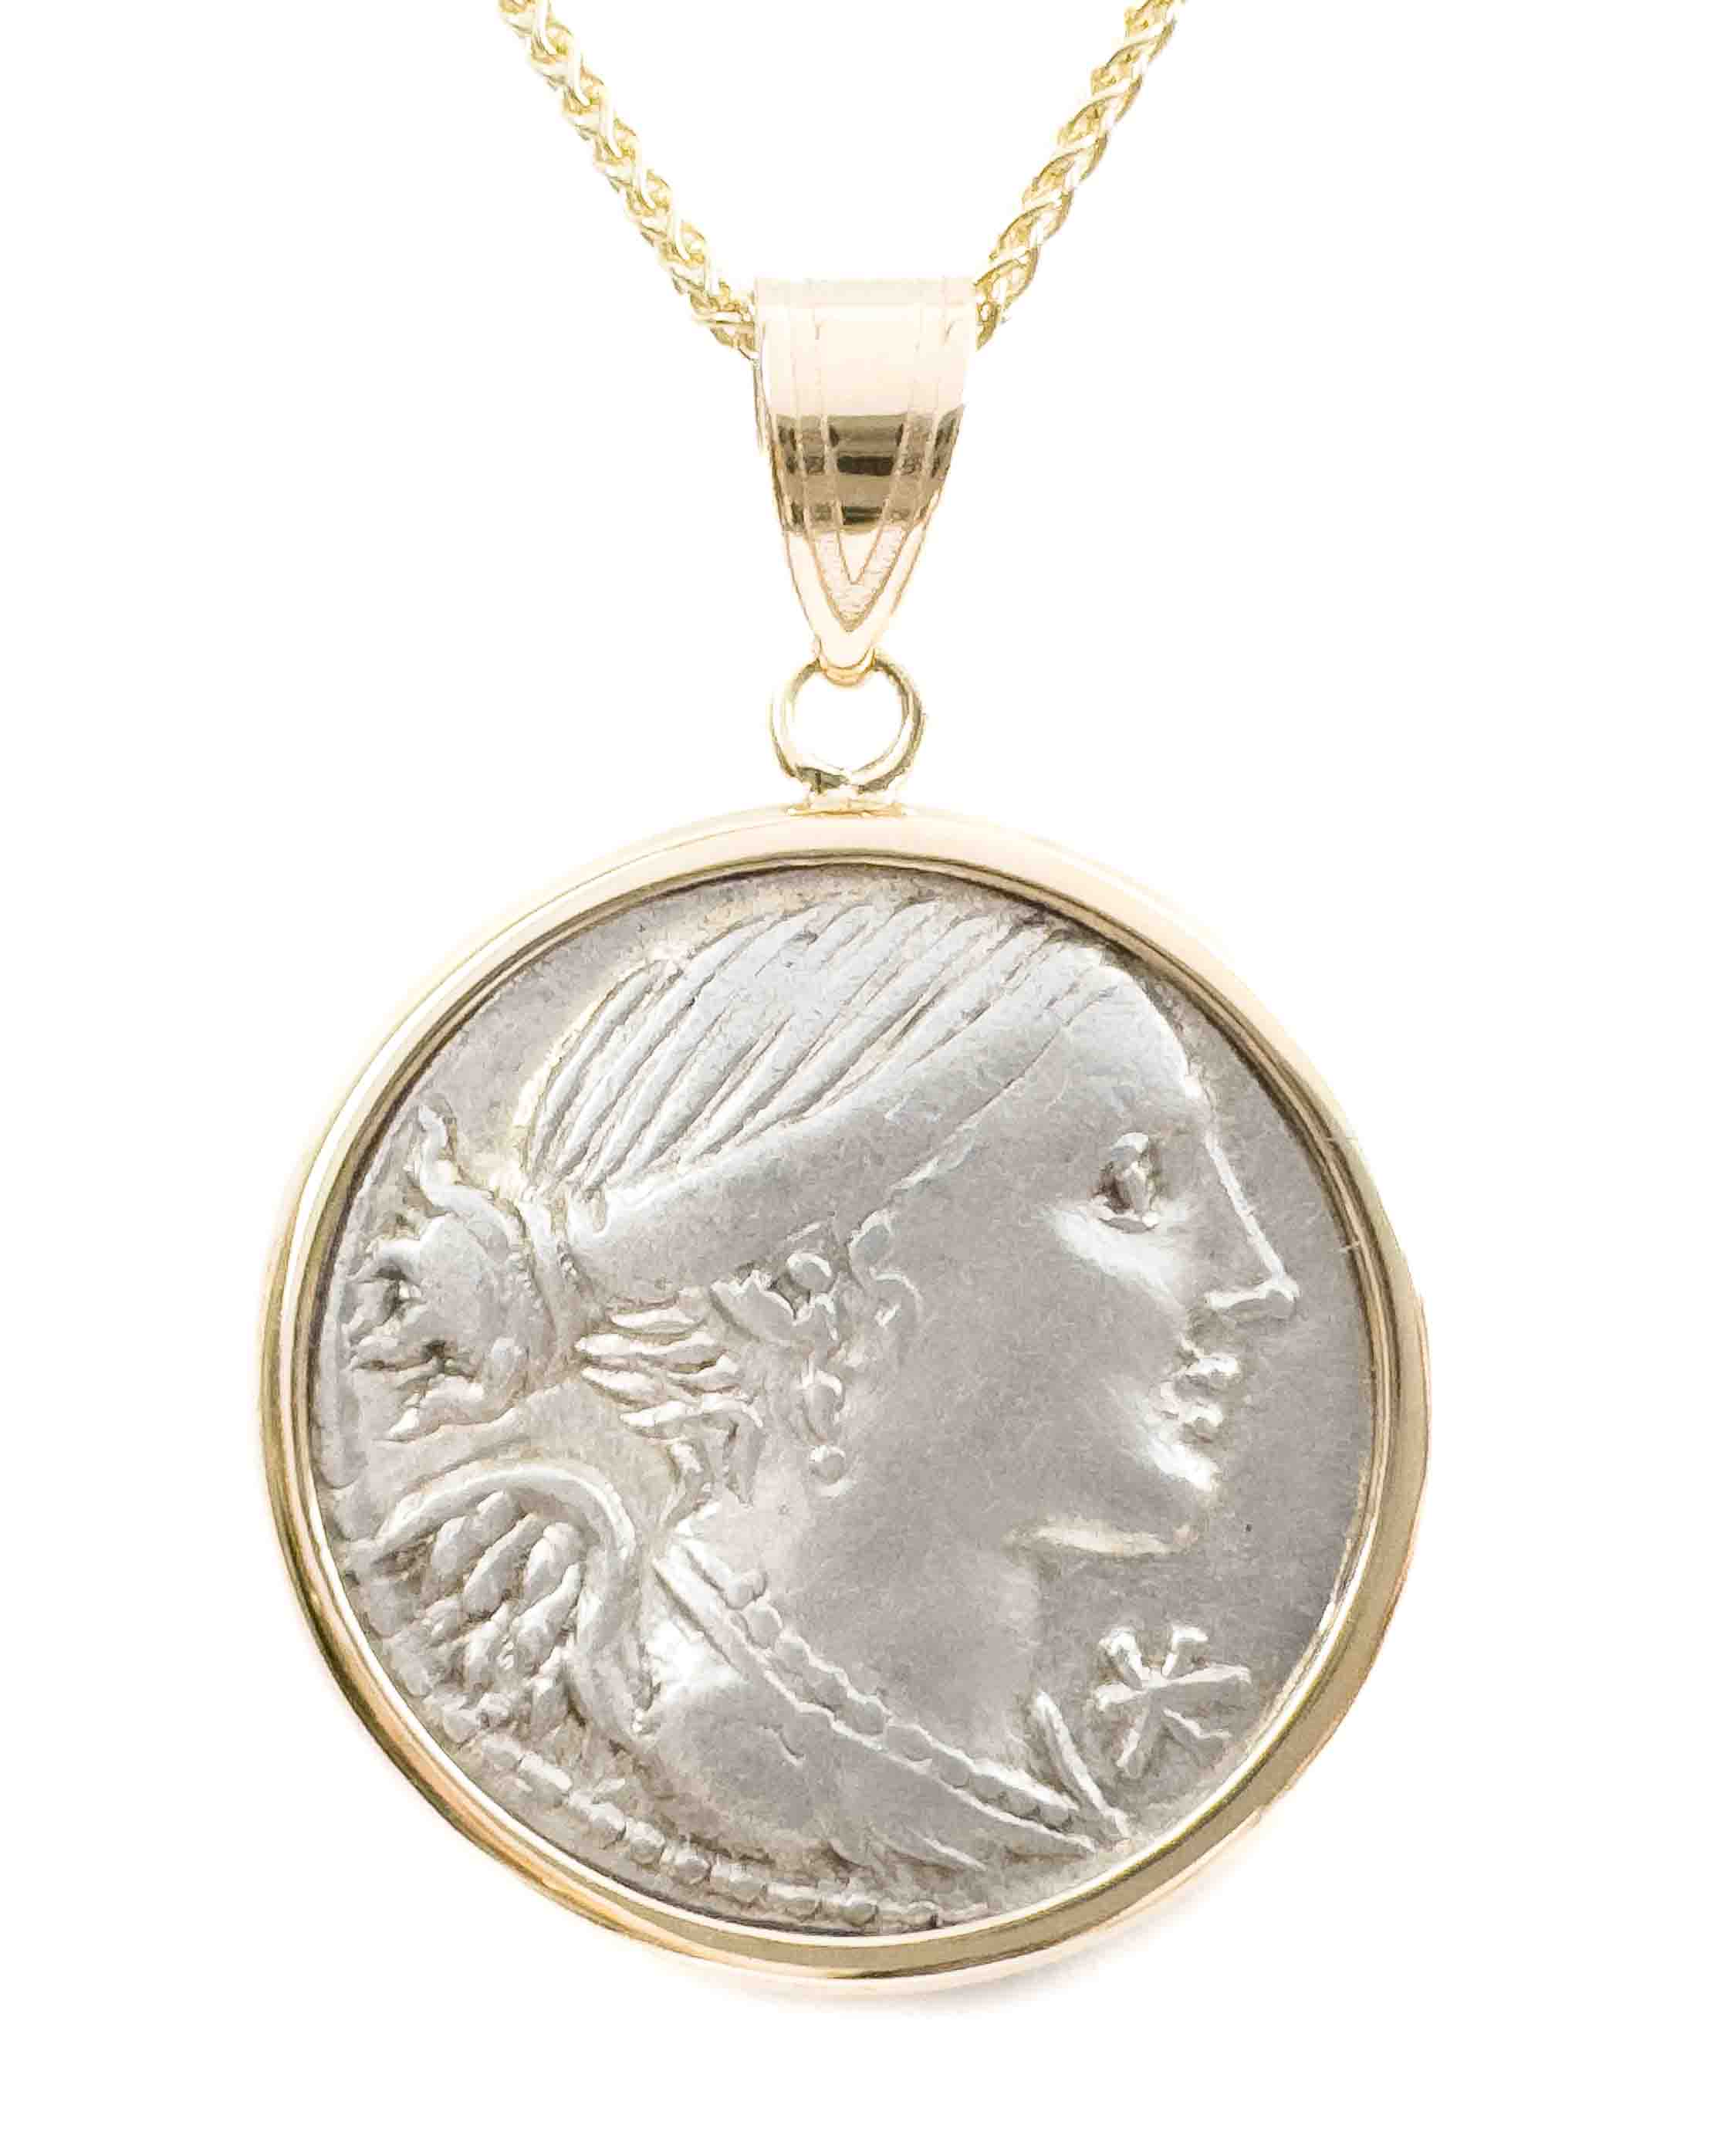 14k Genuine Ancient Roman Coin Necklace (Winged Victory; 46 B.C.)